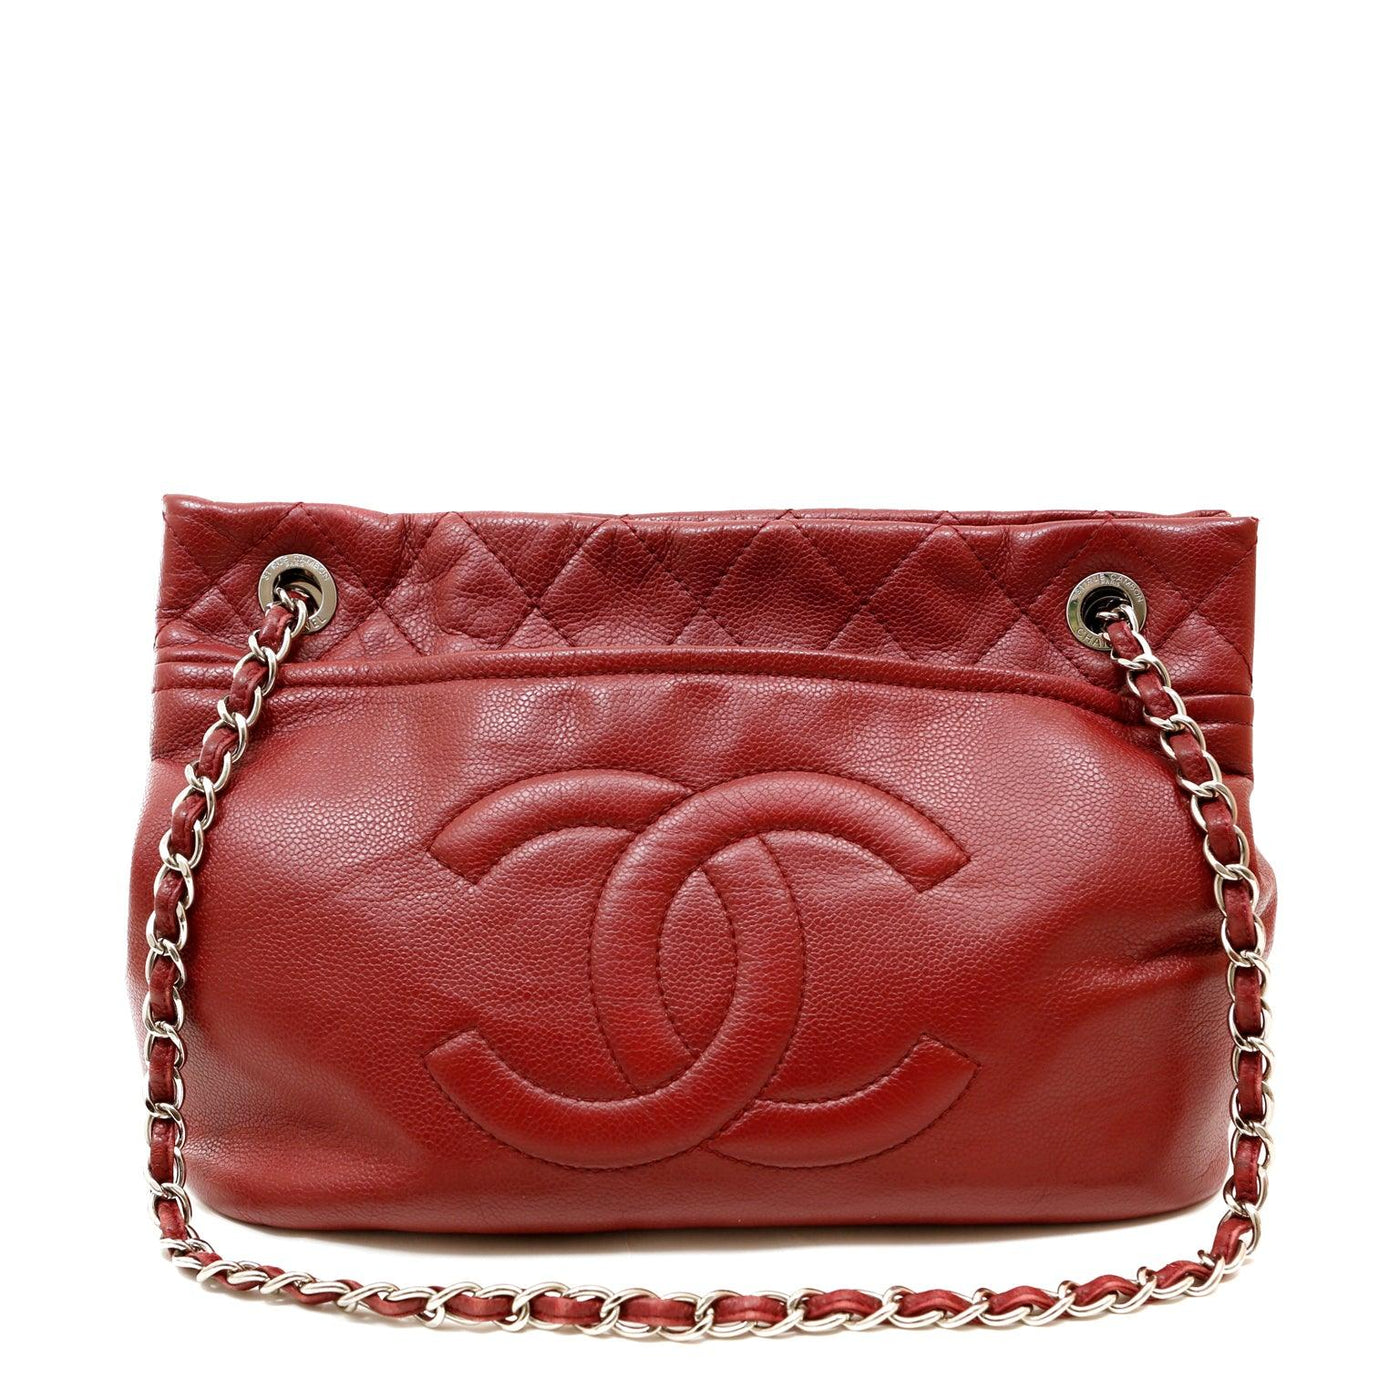 Chanel Red Caviar Leather Tote w/ Silver Hardware - Only Authentics